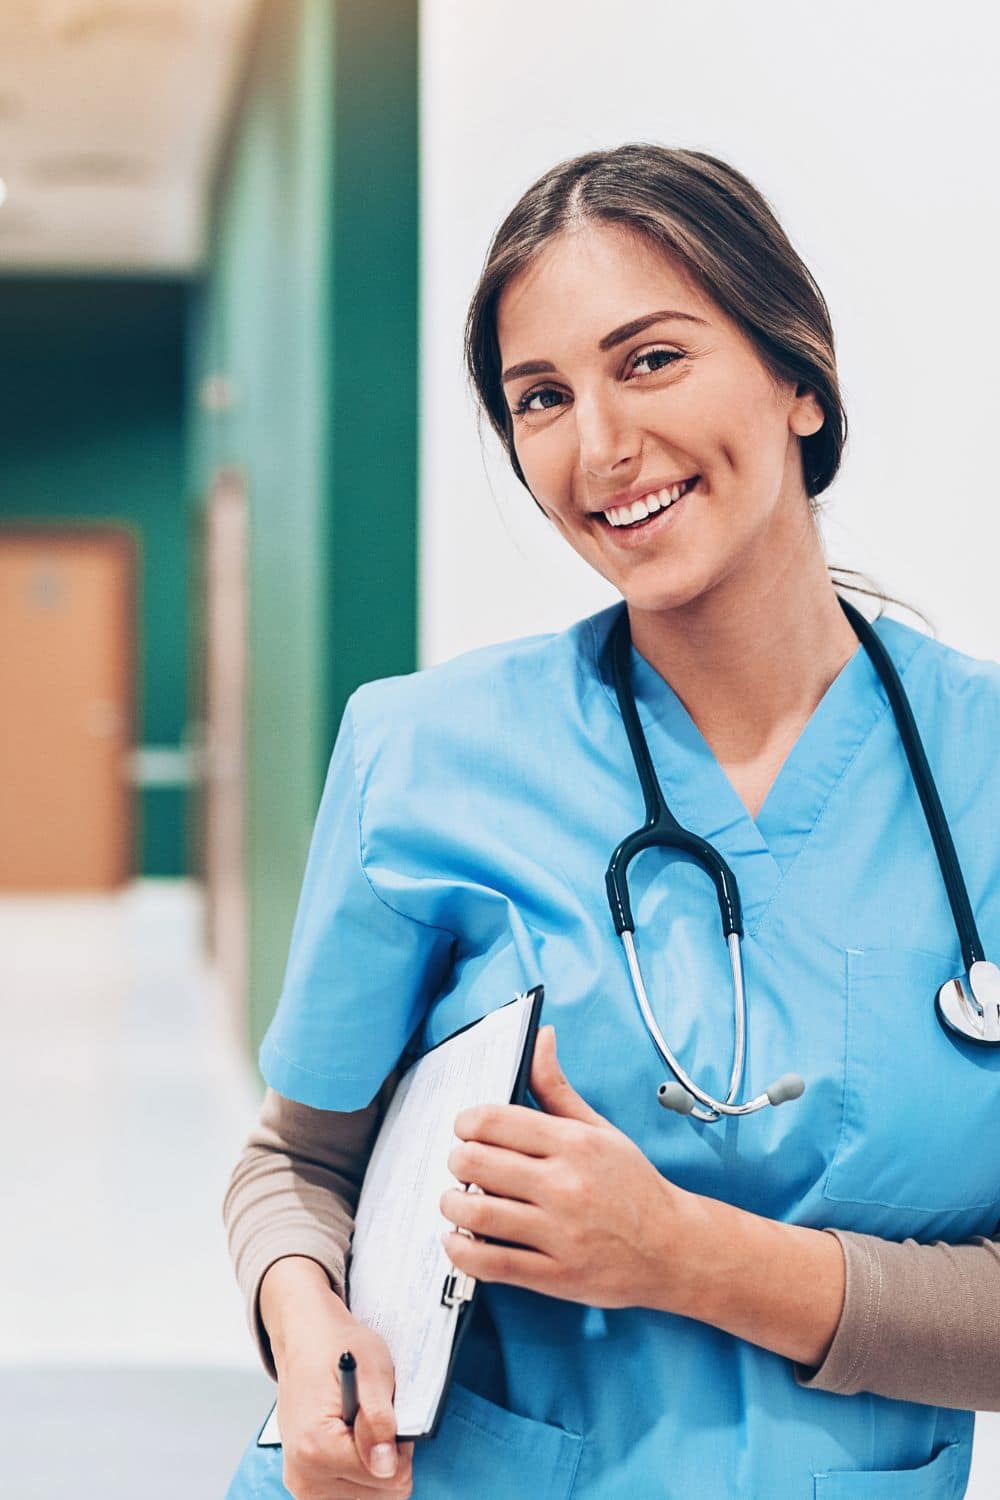 What Are The Benefits Of Becoming A Nurse?